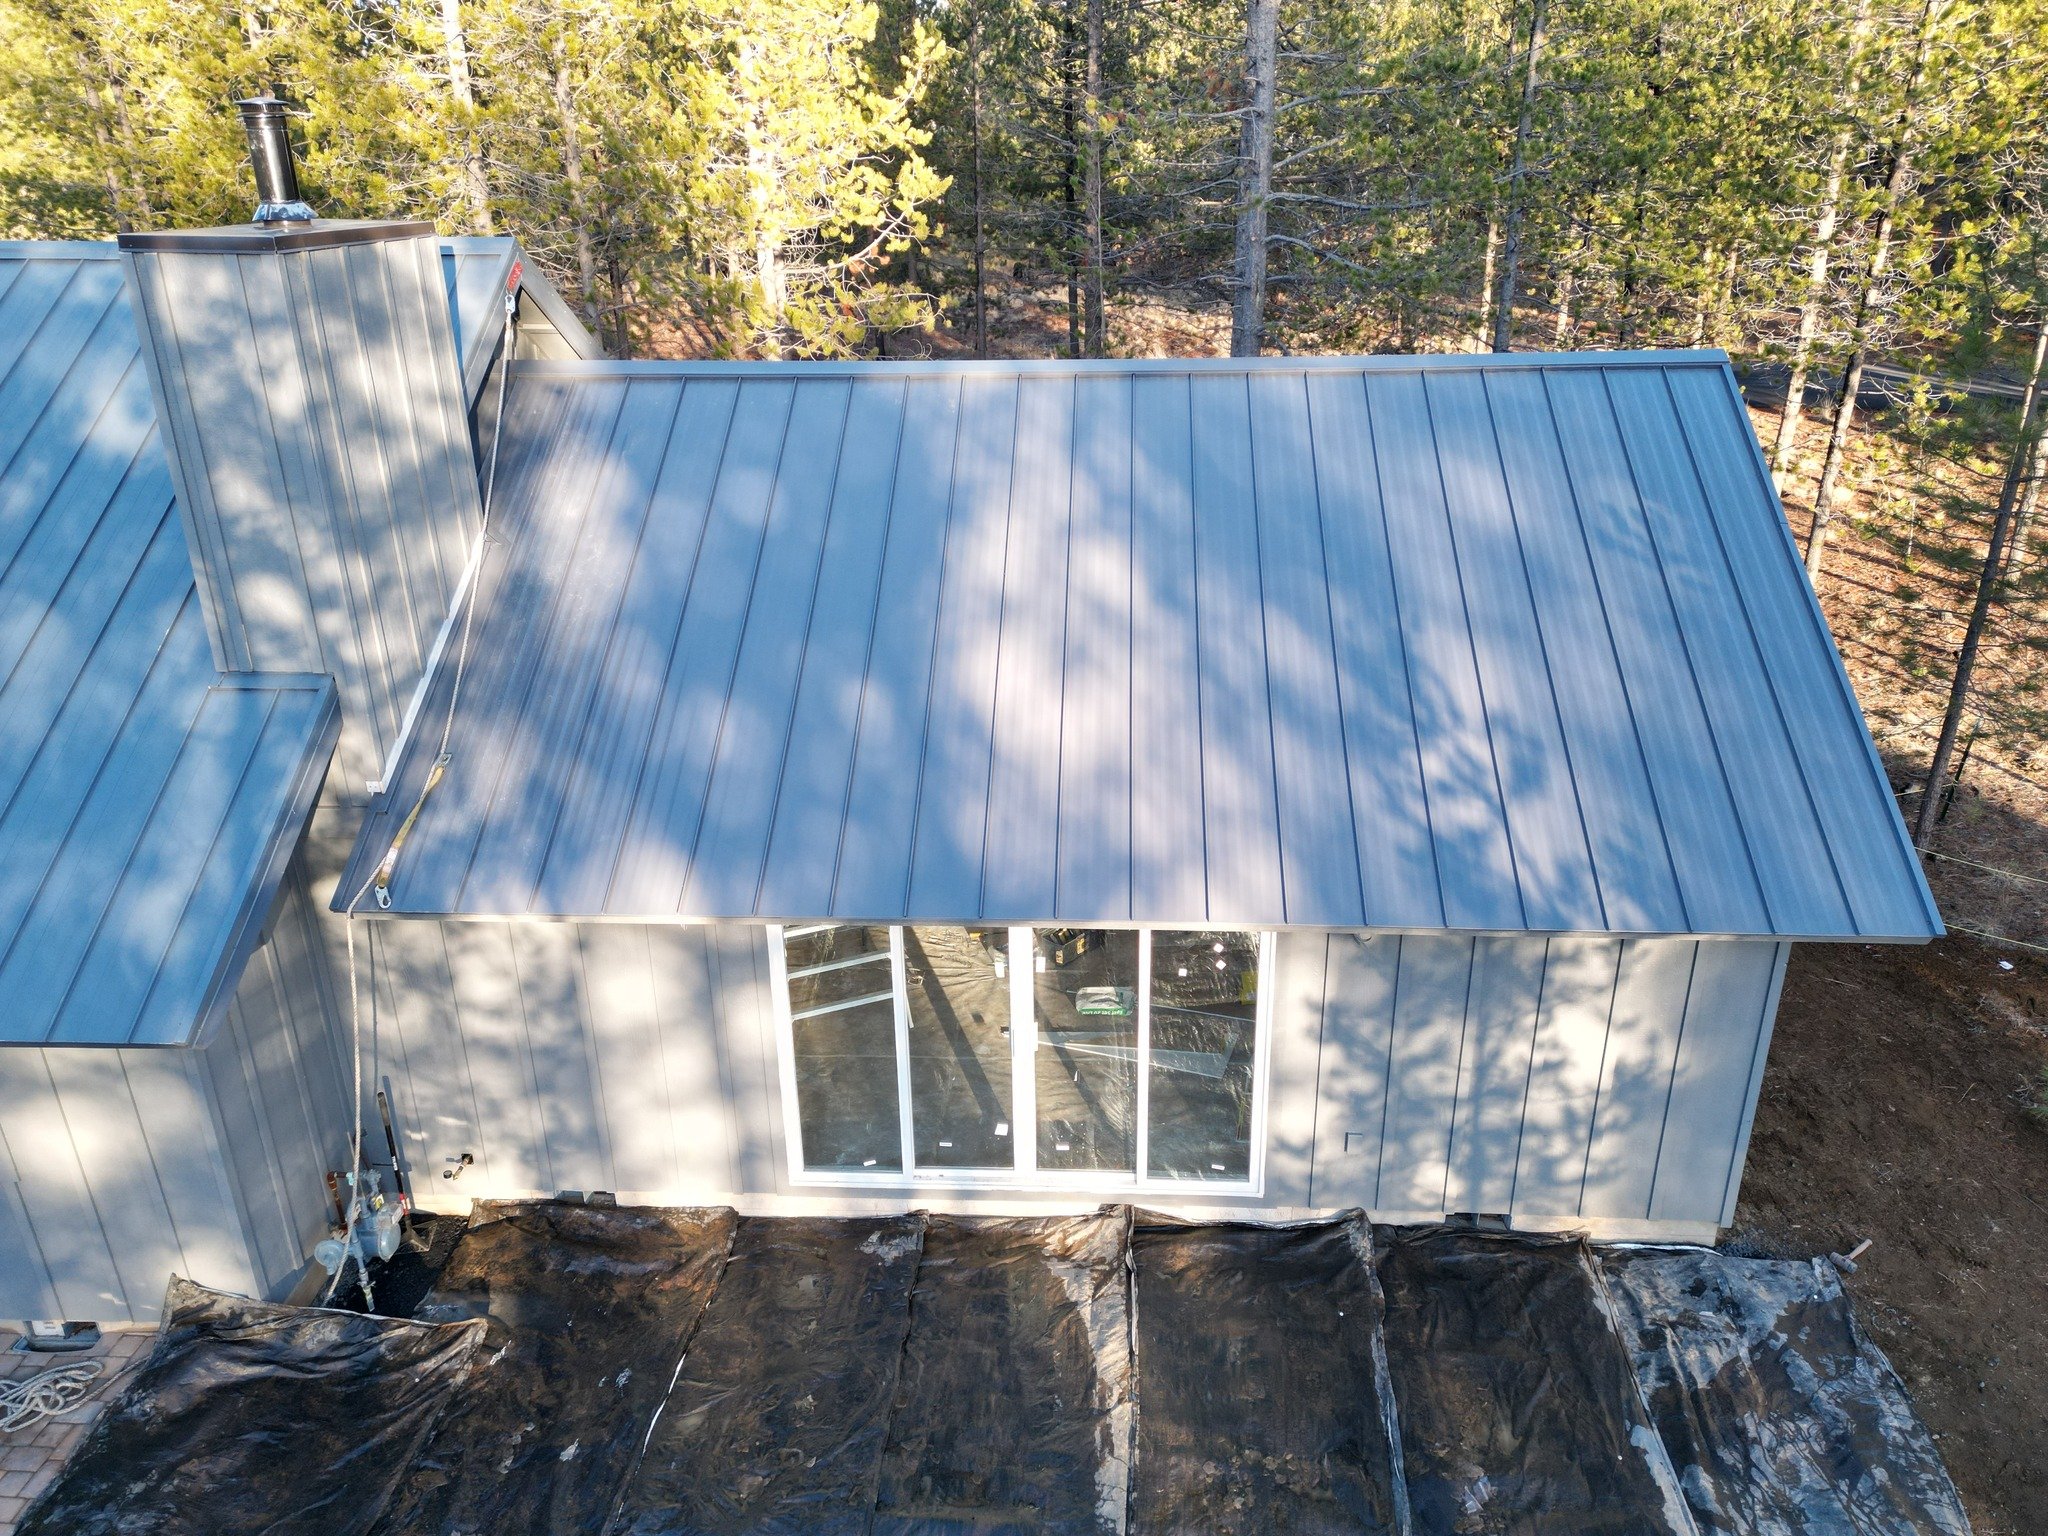 Are you looking for durability and clean lines? You can't go wrong with a metal roof!